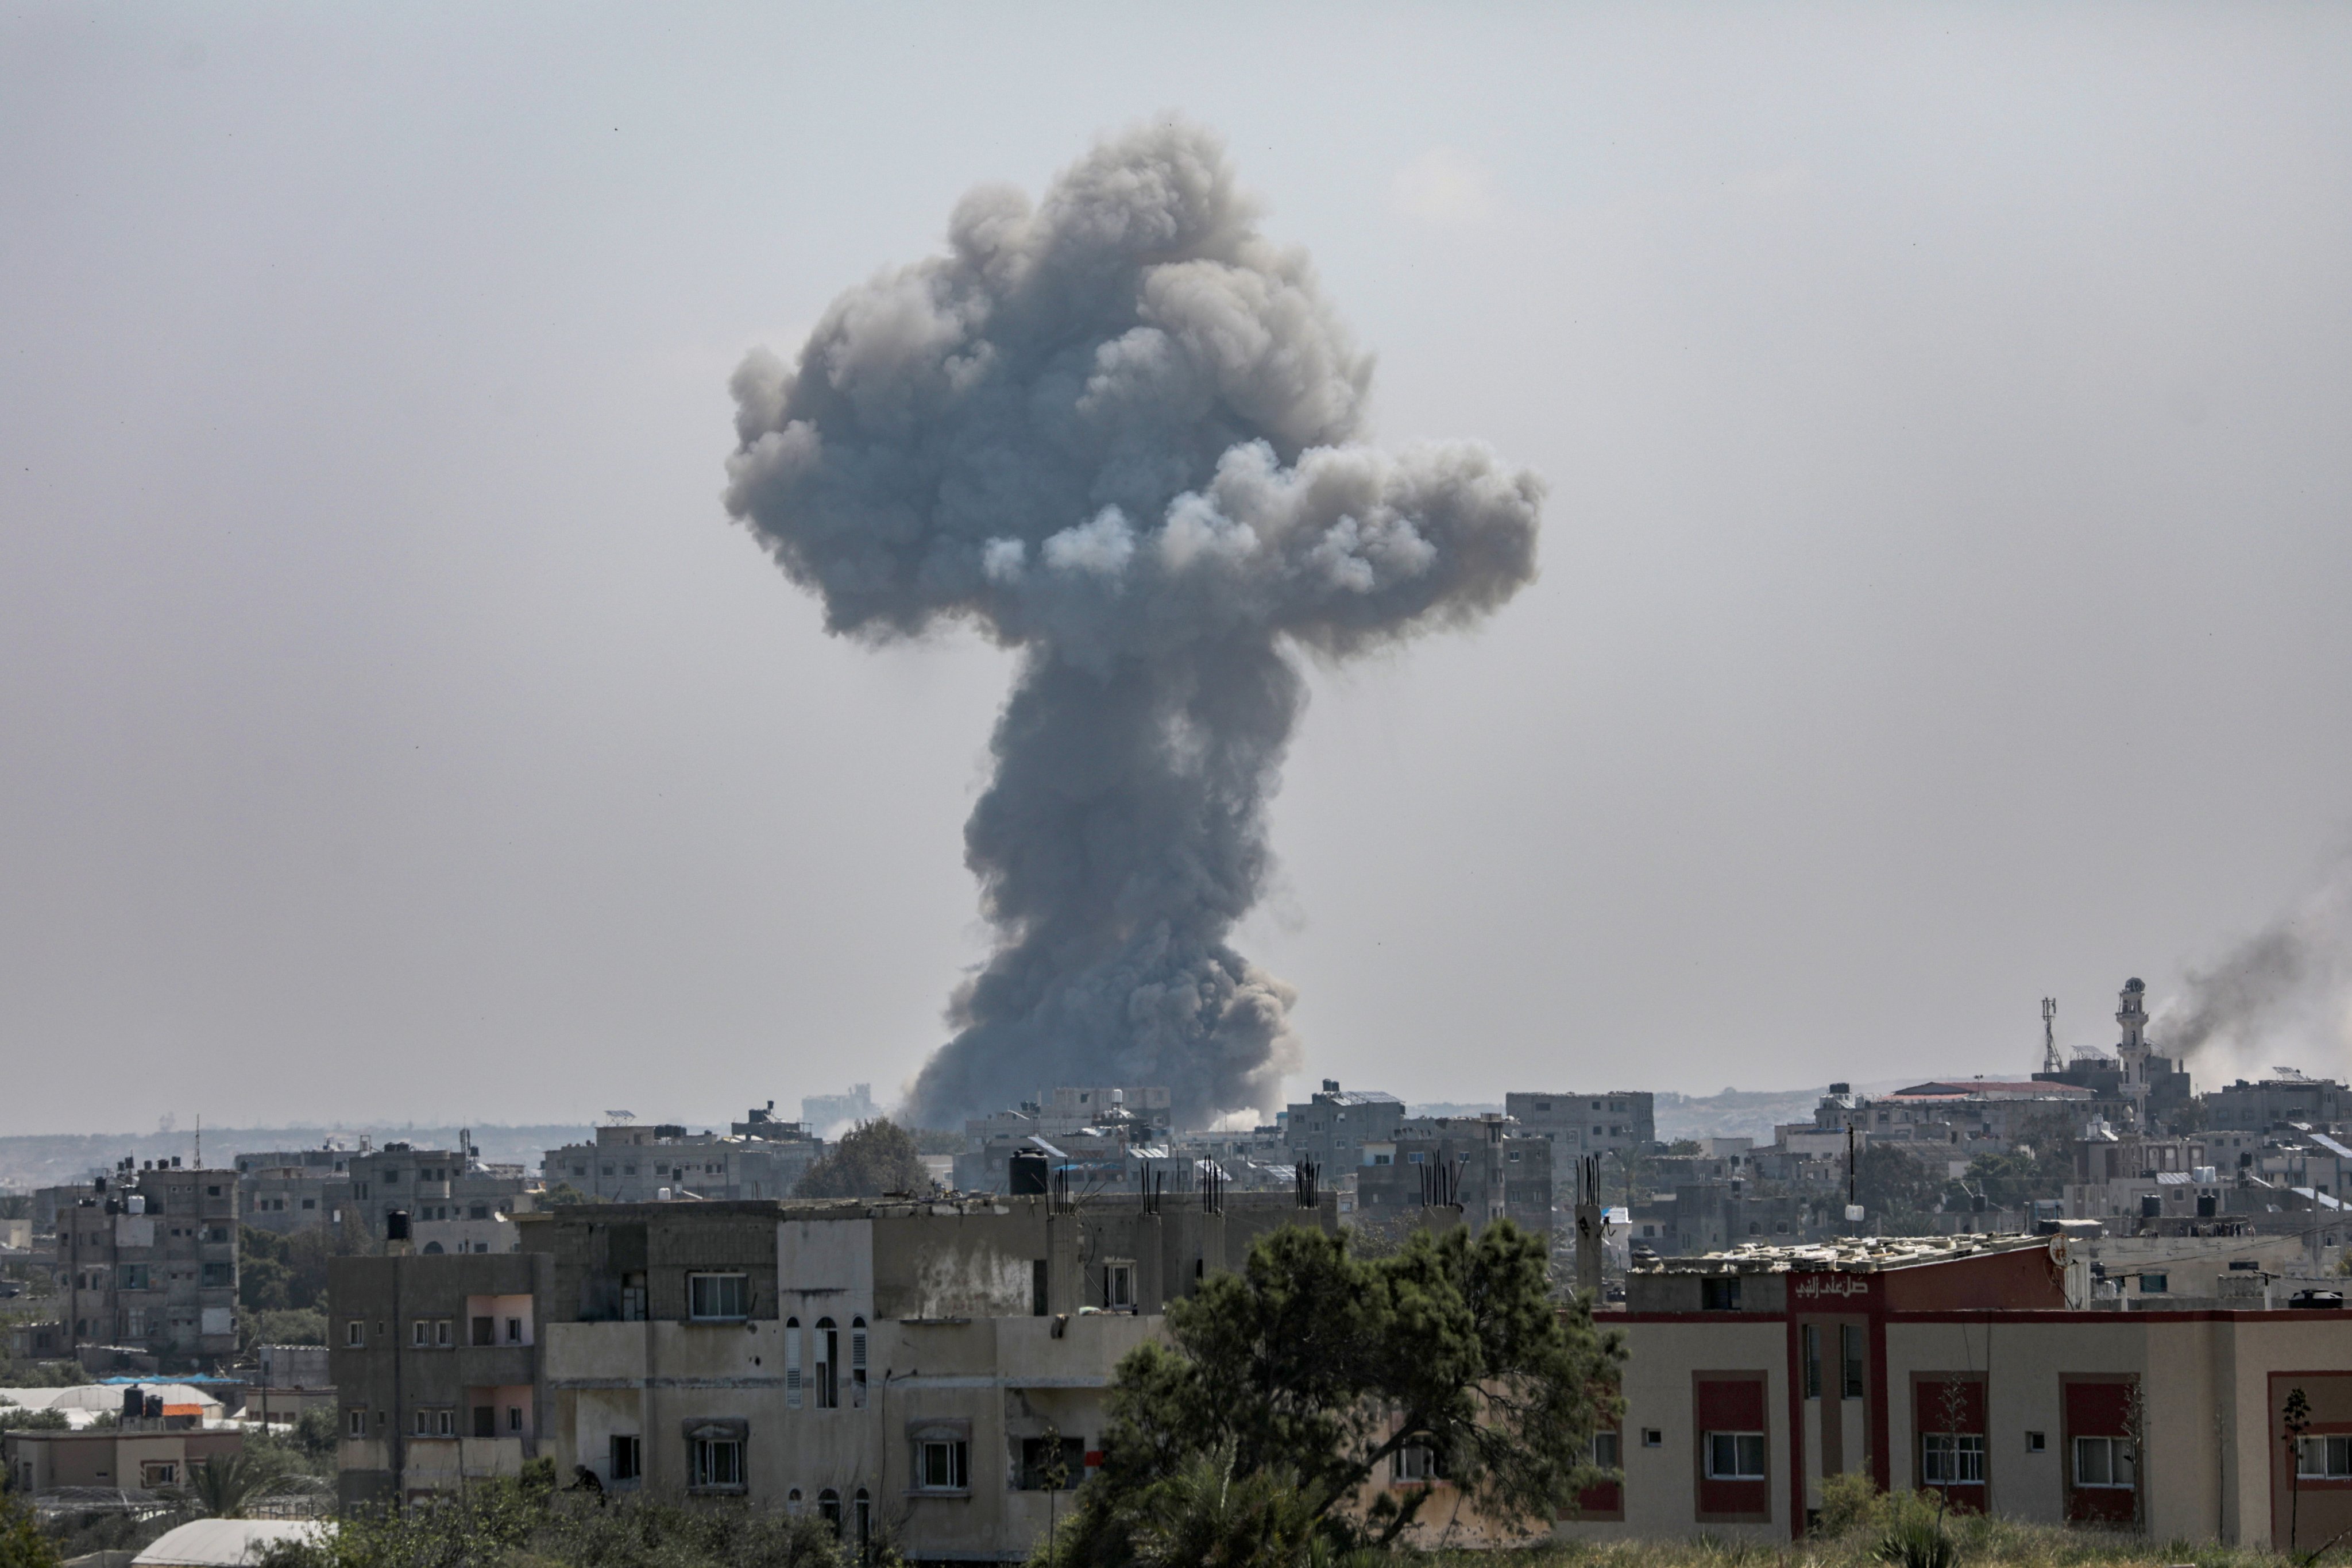 Smoke rises from an explosion during an Israeli military operation on Friday in al-Nusairat refugee camp, south of Gaza City. More than 33,500 Palestinians have been killed in the six-month conflict, according to the enclave’s Hamas-run health ministry. Photo: EPA-EFE